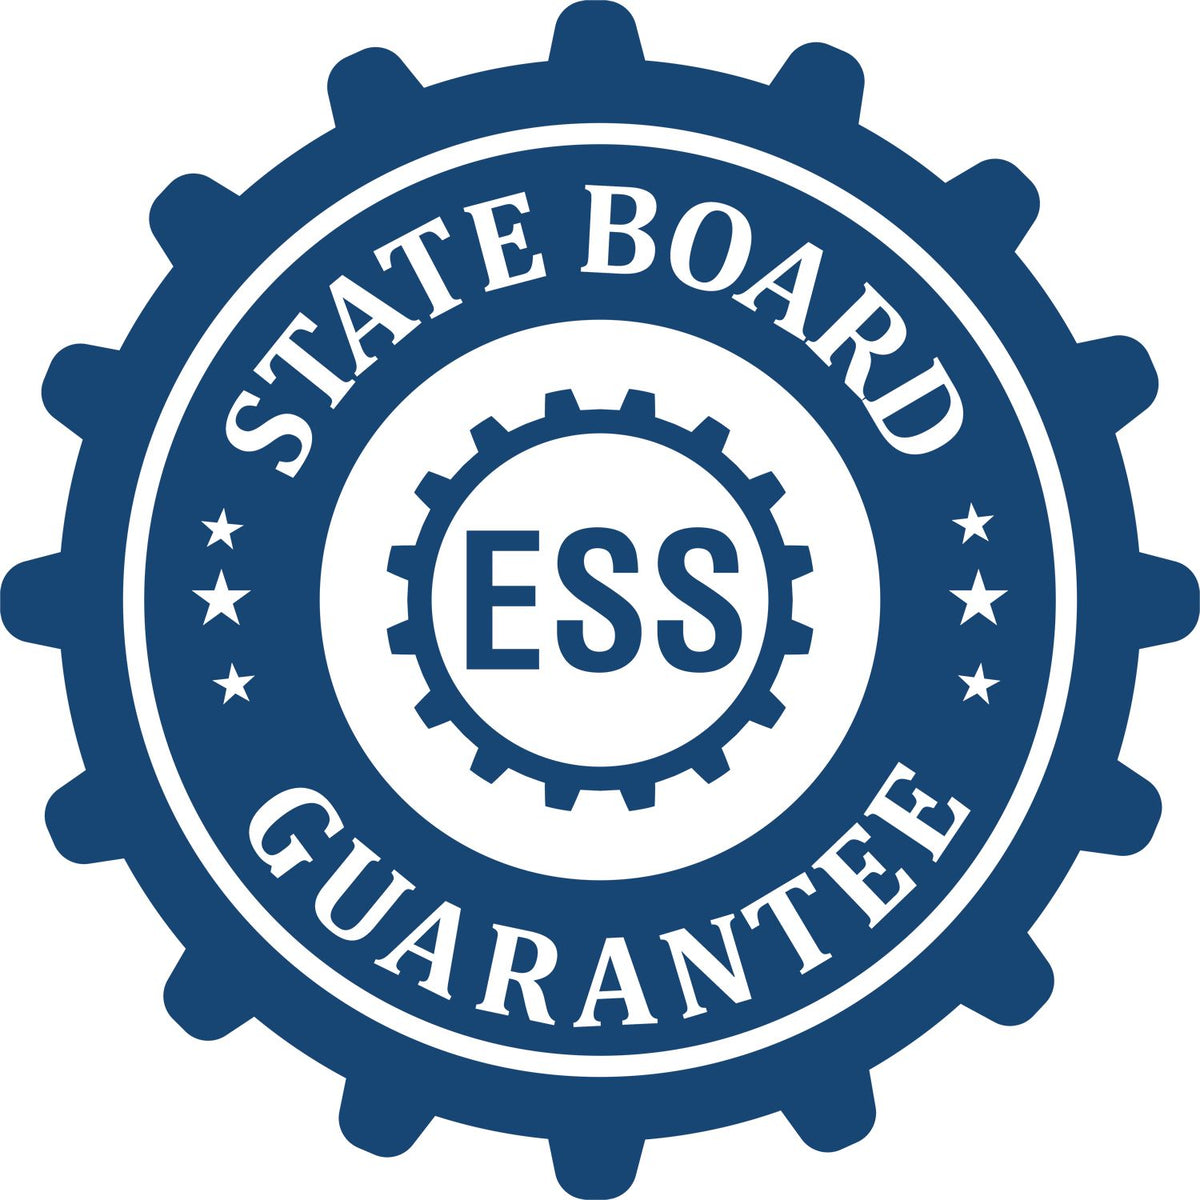 An emblem in a gear shape illustrating a state board guarantee for the Massachusetts Professional Engineer Seal Stamp product.